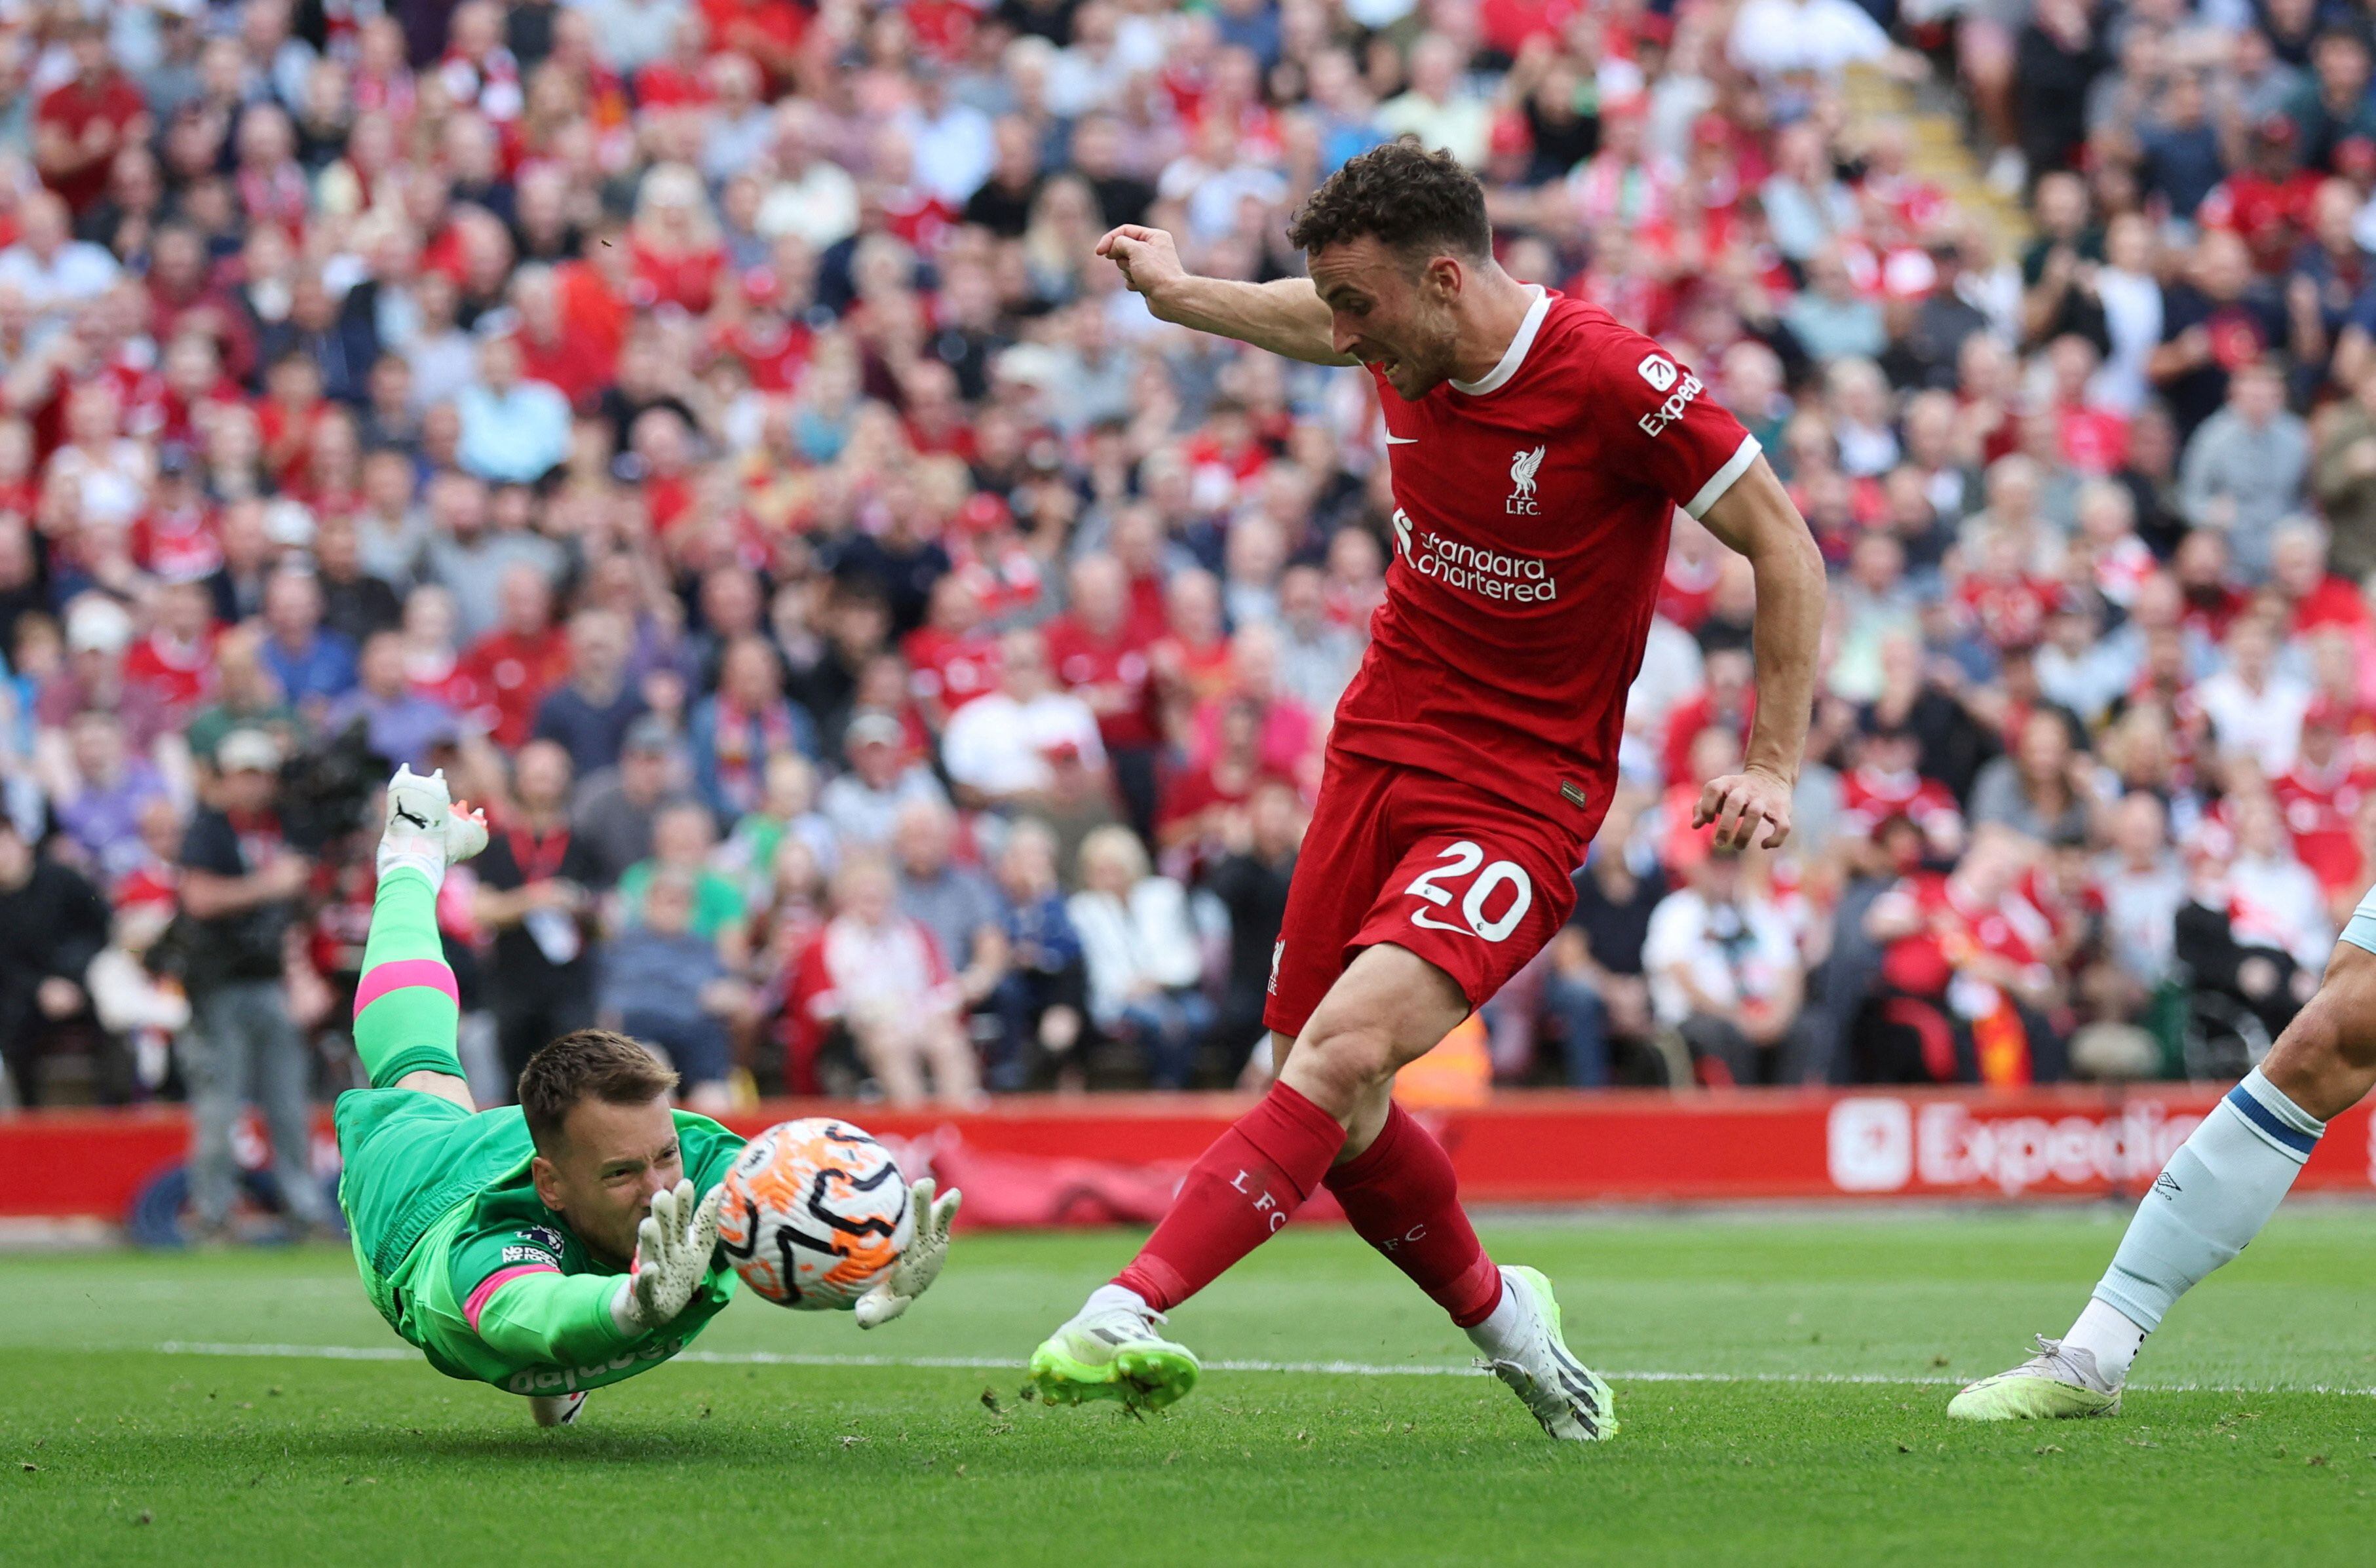 Liverpool's Diogo Jota left out after illness